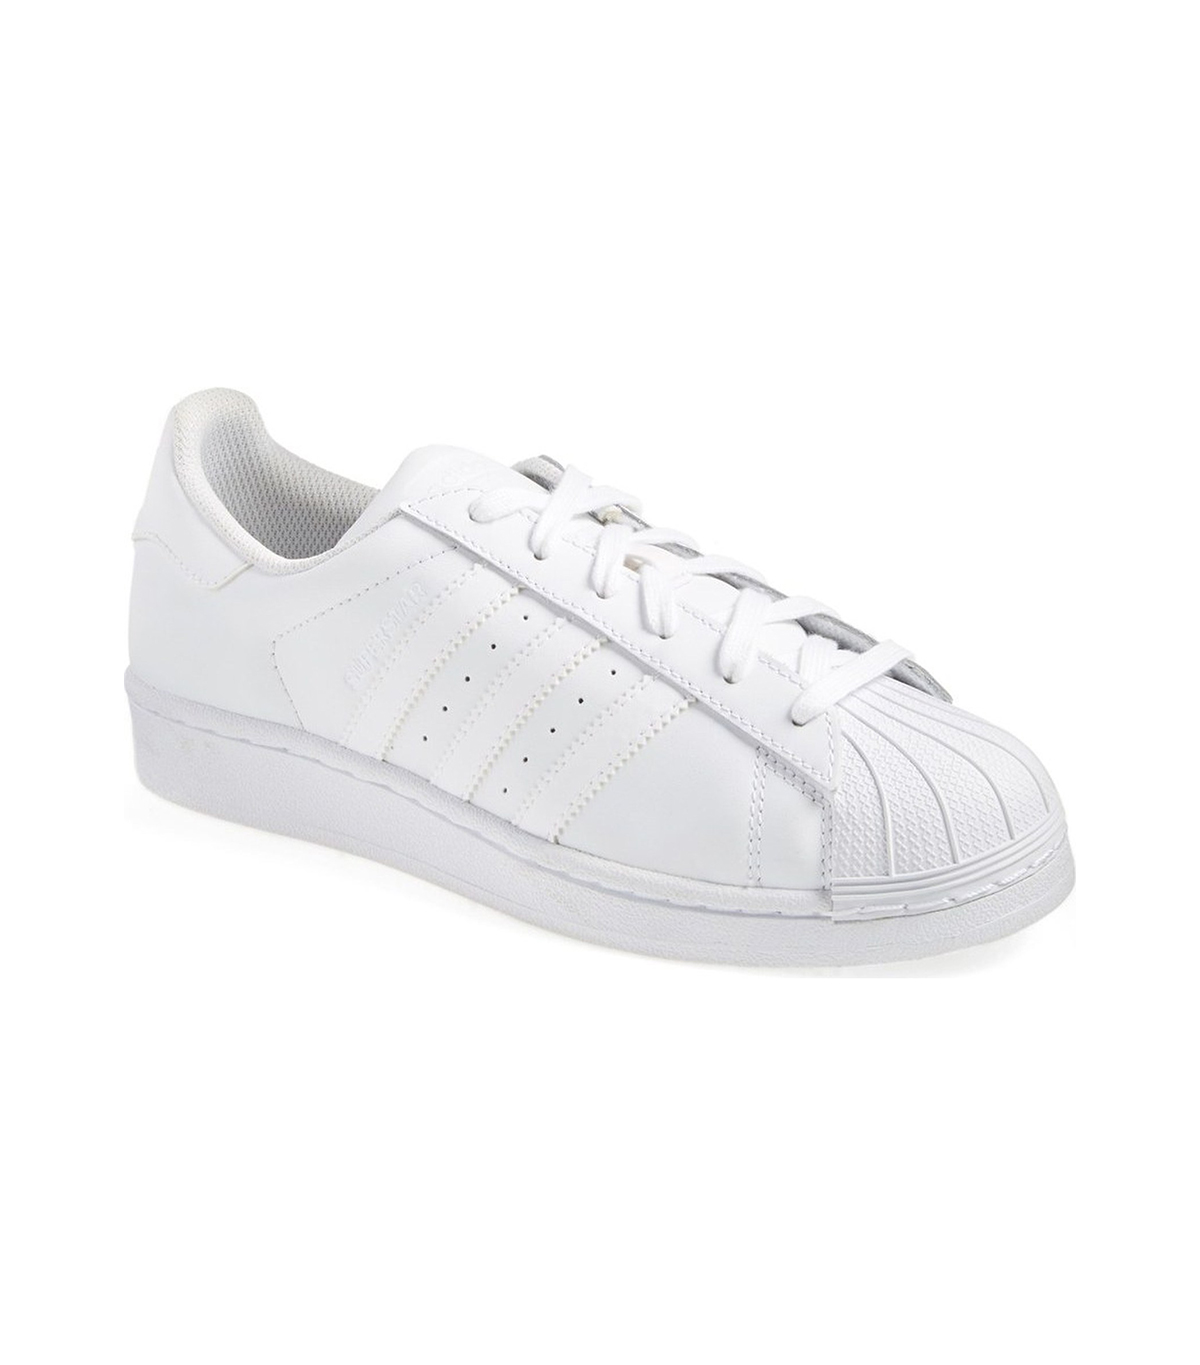 15 Pairs of All-White Sneakers | Who What Wear